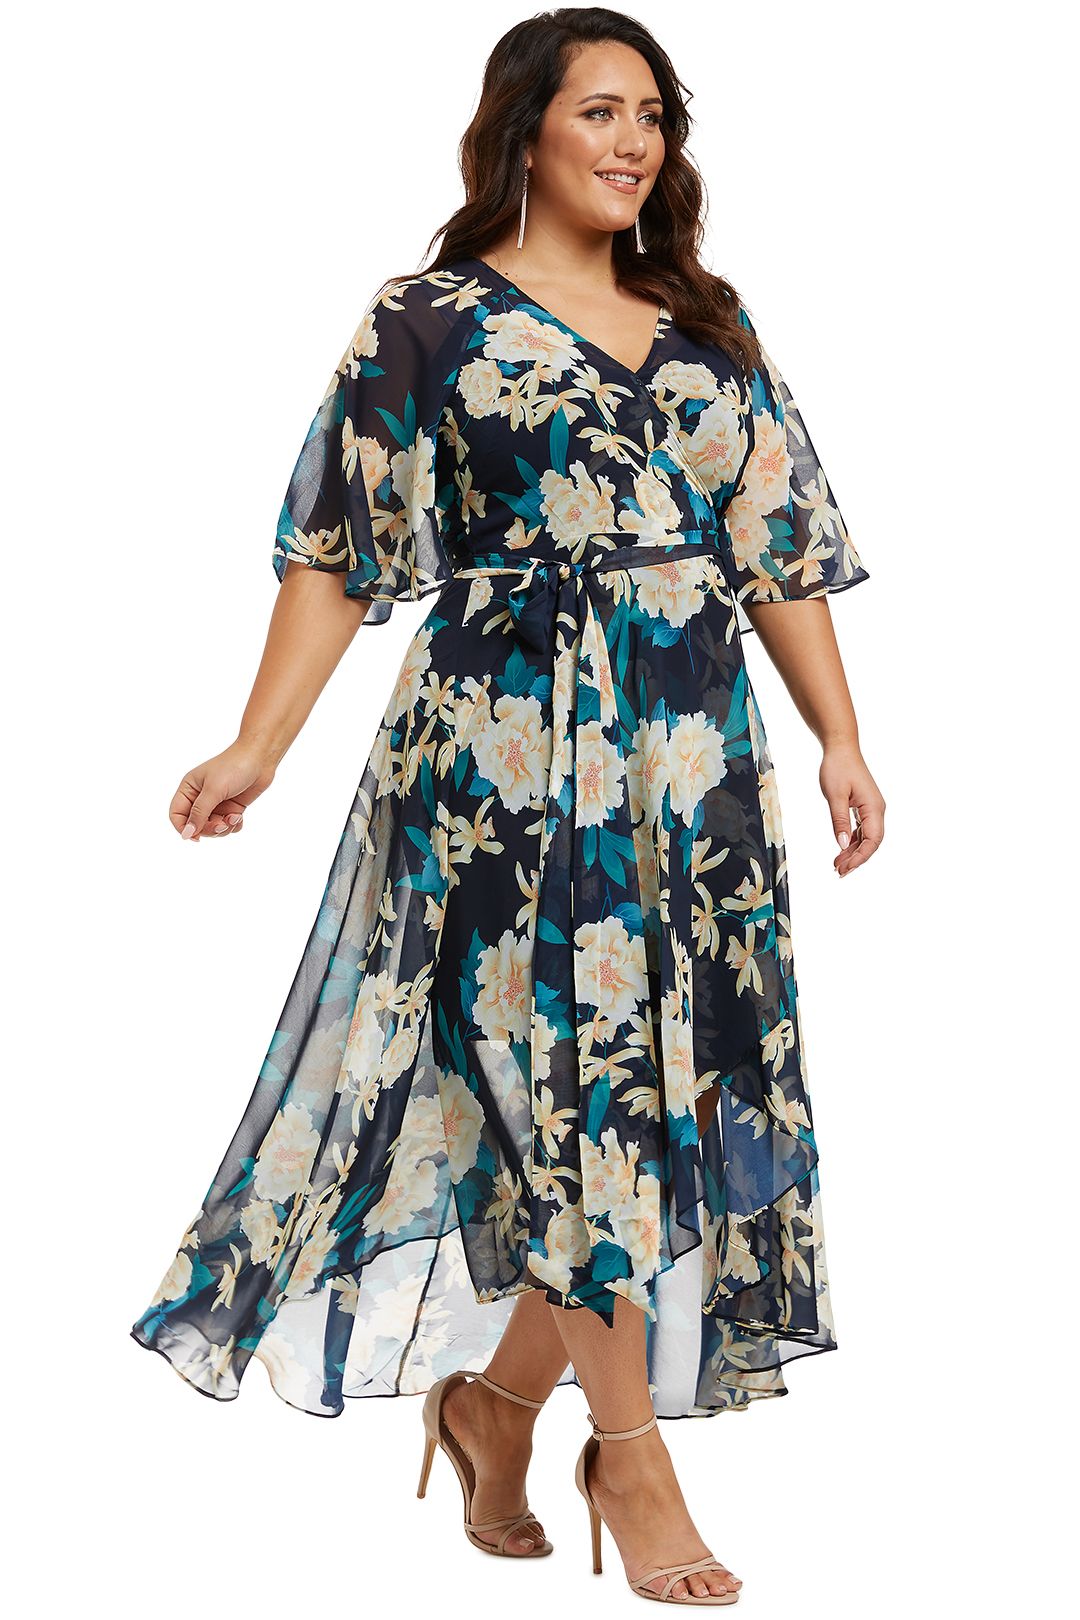 Shibuya Floral Maxi Dress in Navy by City Chic for Hire